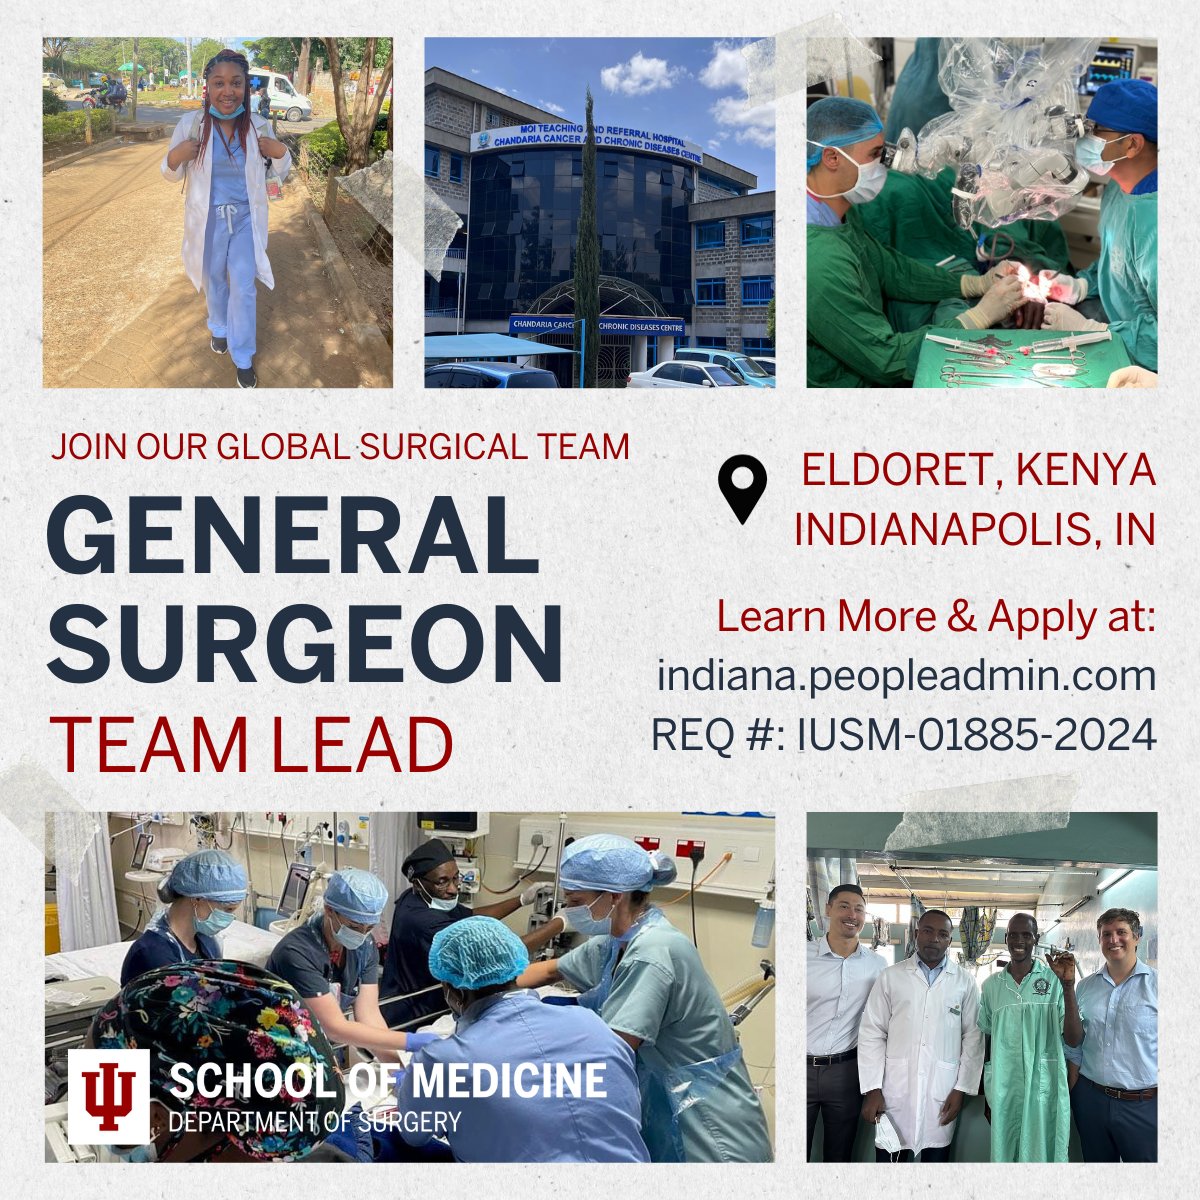 📢Come Join Our Team! We are still searching for our next general surgeon team lead. This role will be part of our global surgical team based in Eldoret, Kenya and right here in Indianapolis. This is a wonderful opportunity to not only lead but also teach. If you have any